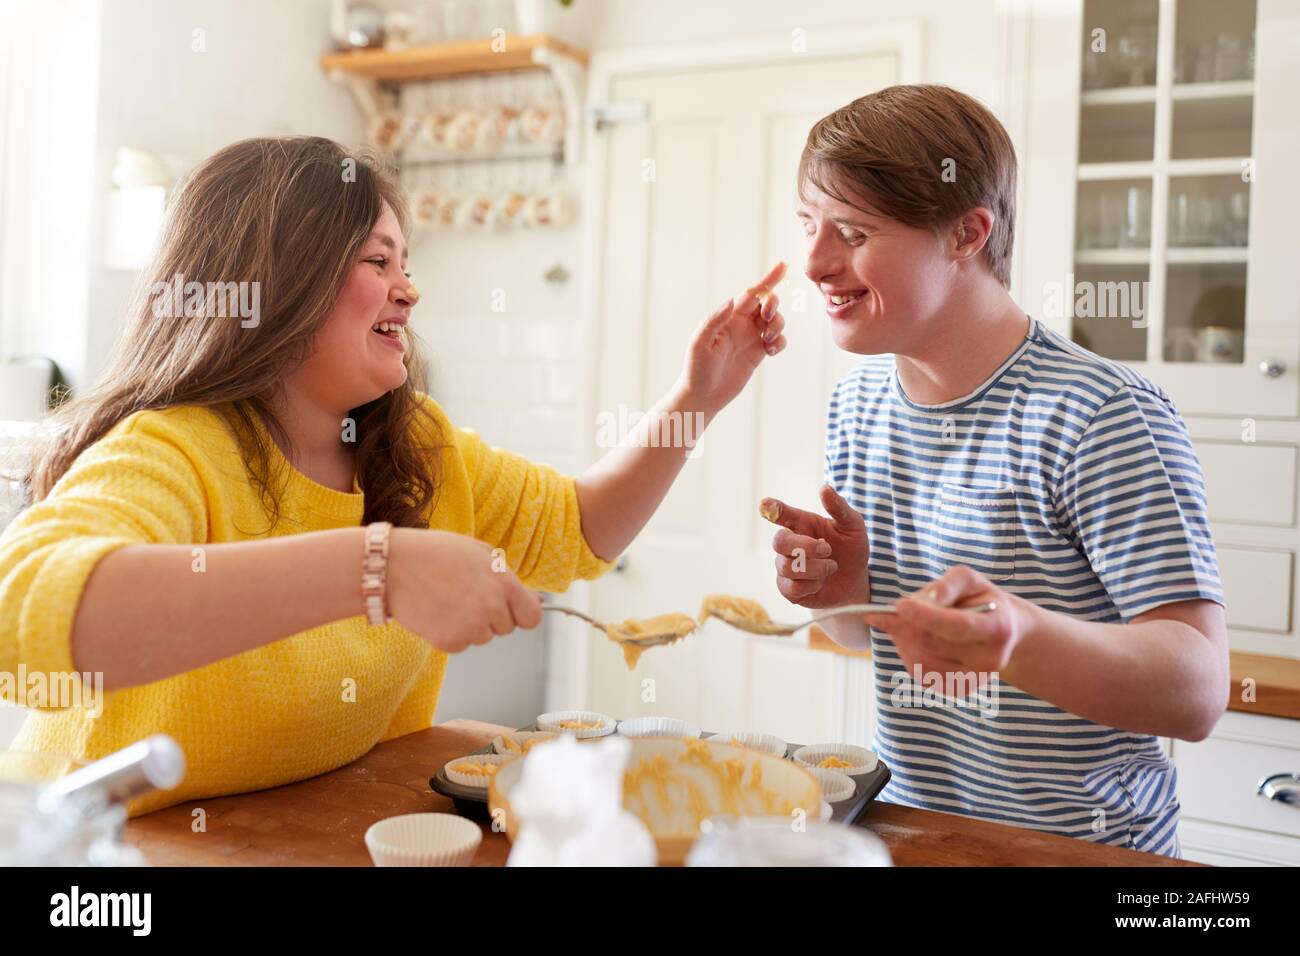 Young Downs Syndrome Couple Having Fun Baking Cupcakes In Kitchen At Home Stock Photo